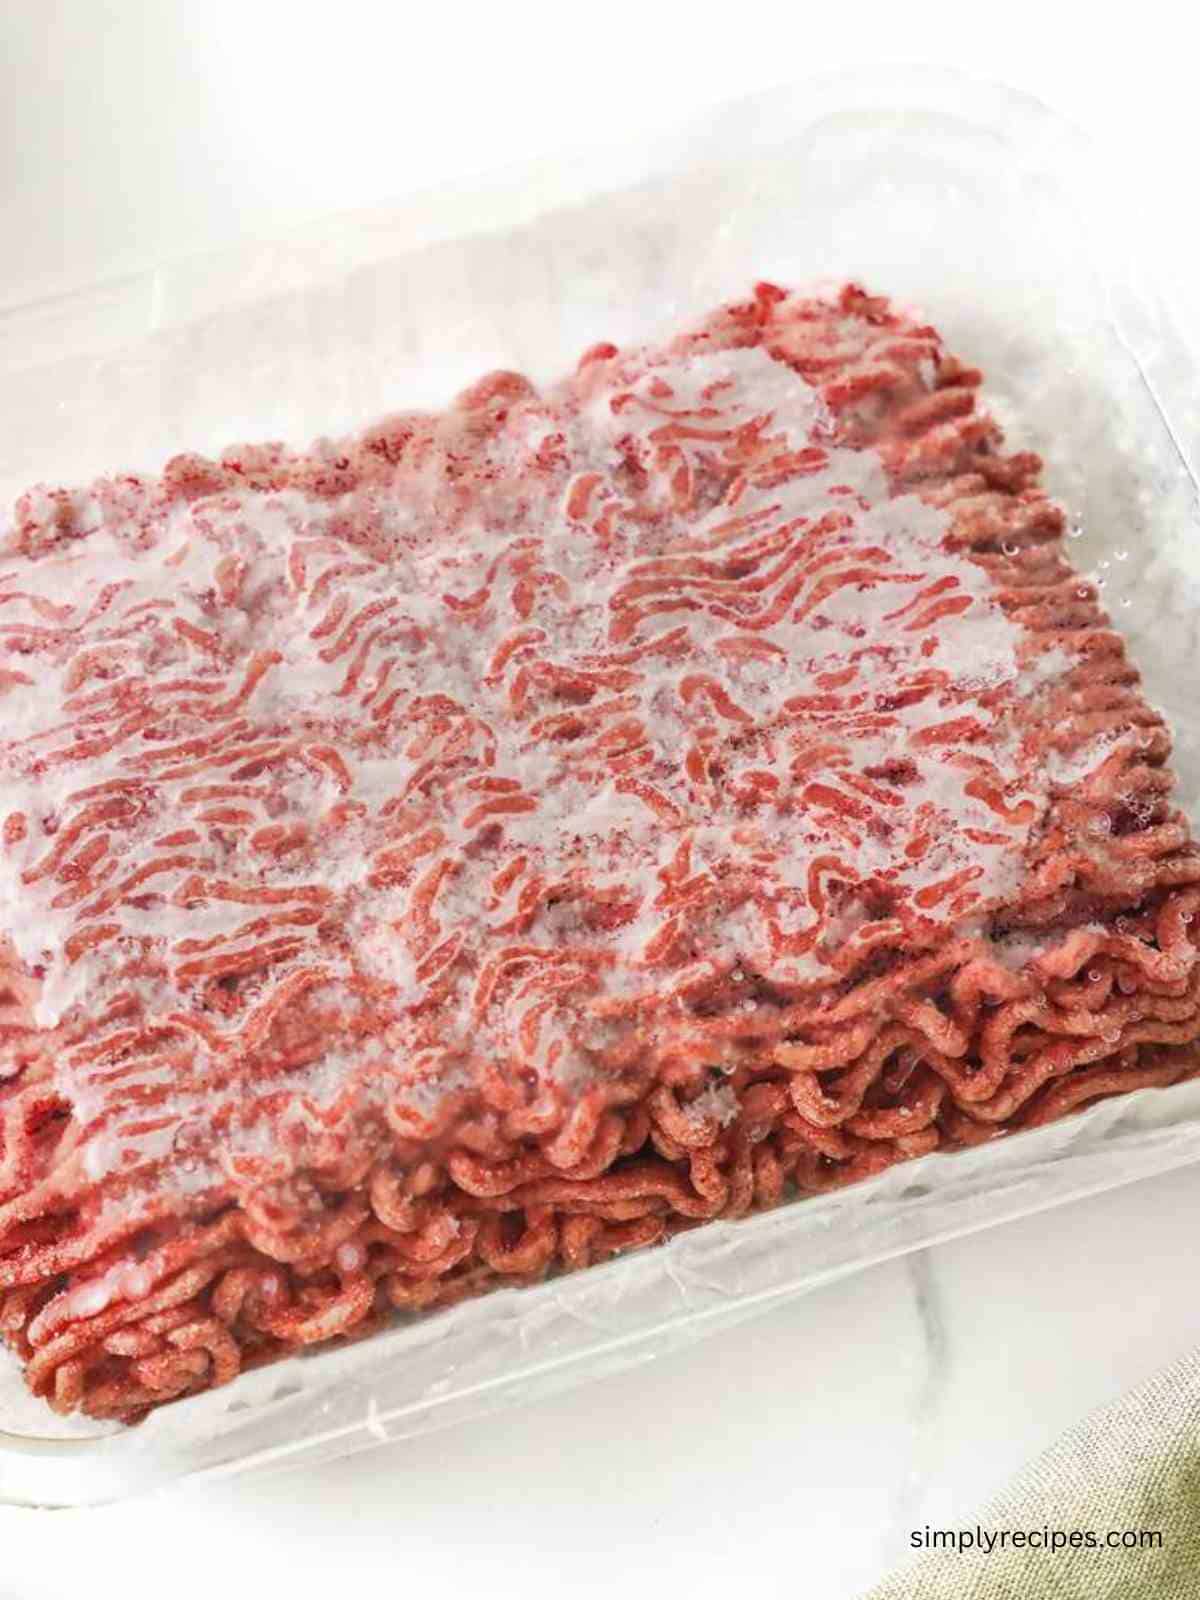 how long can you freeze ground beef